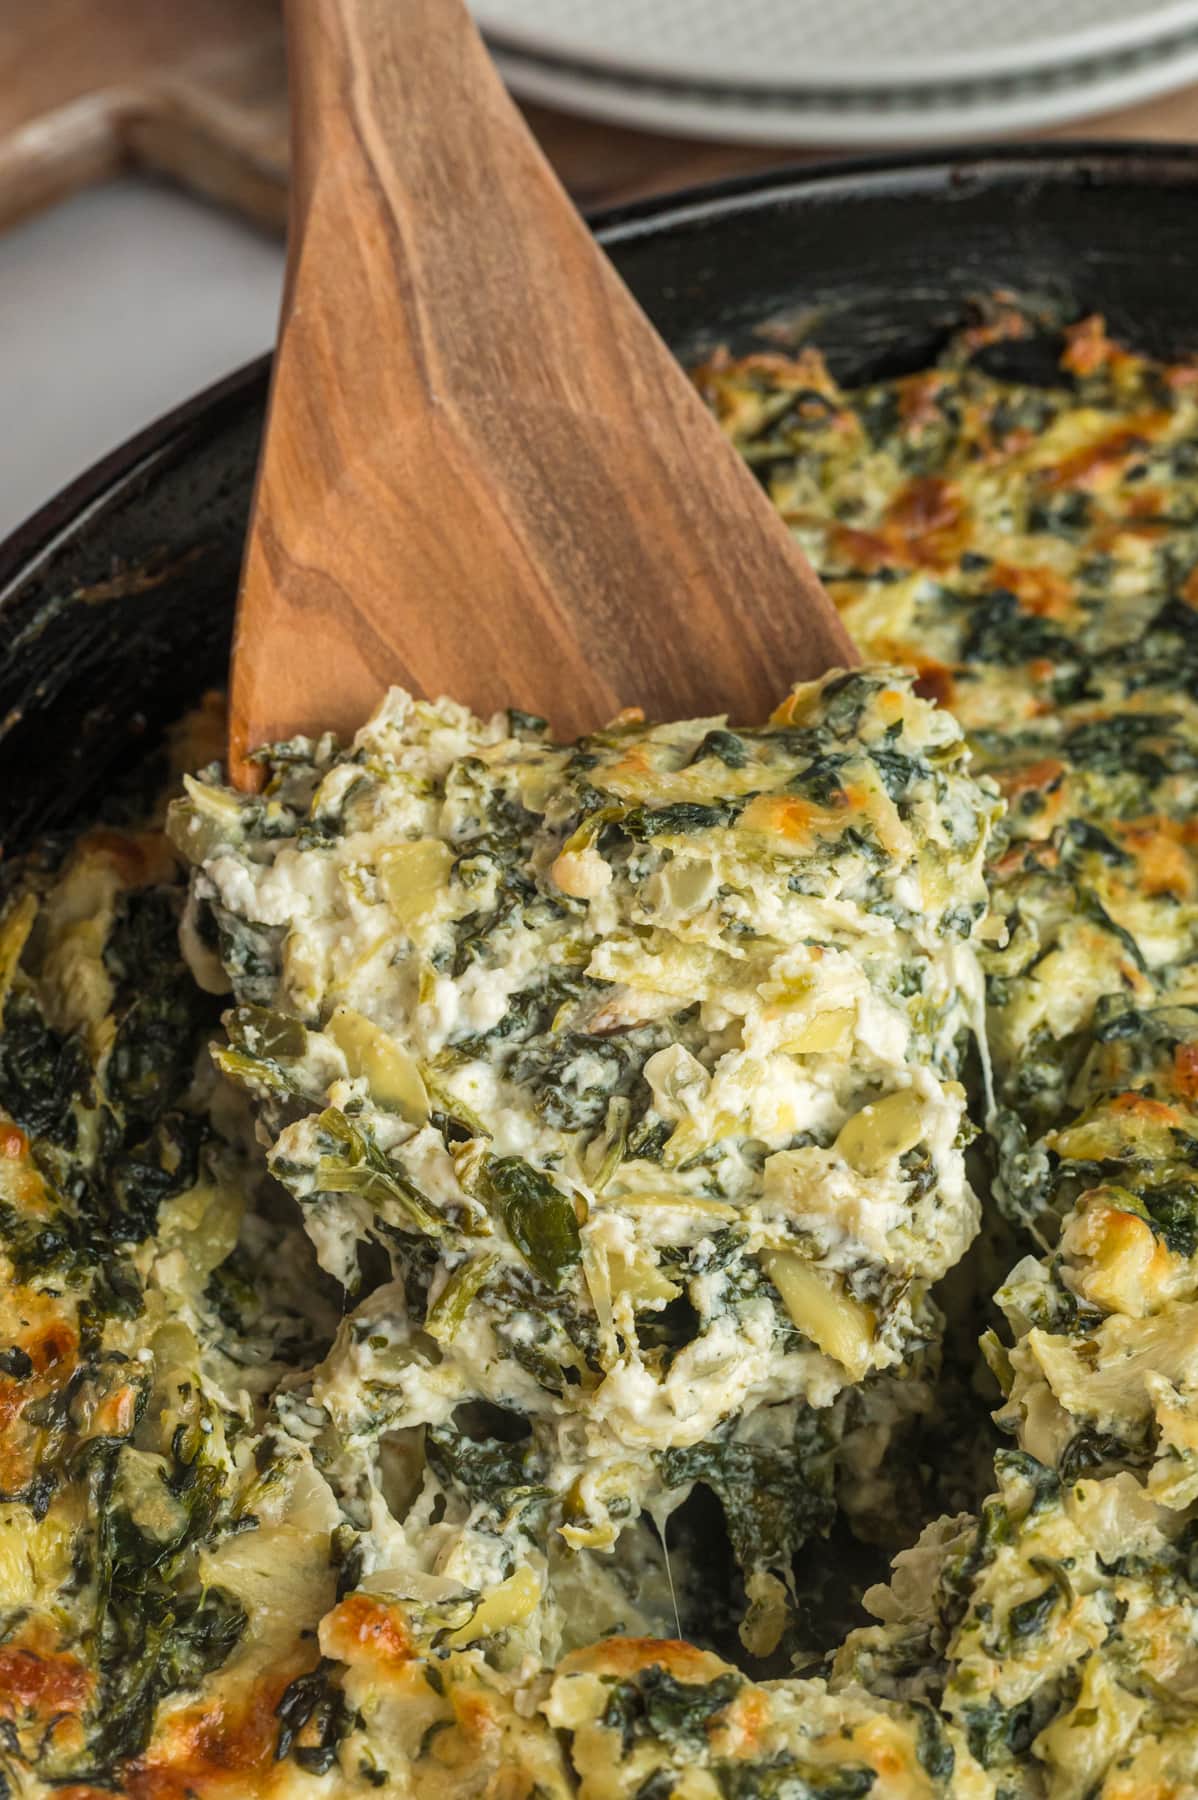 Hot Spinach Artichoke Dip spooned from a cast iron skillet.